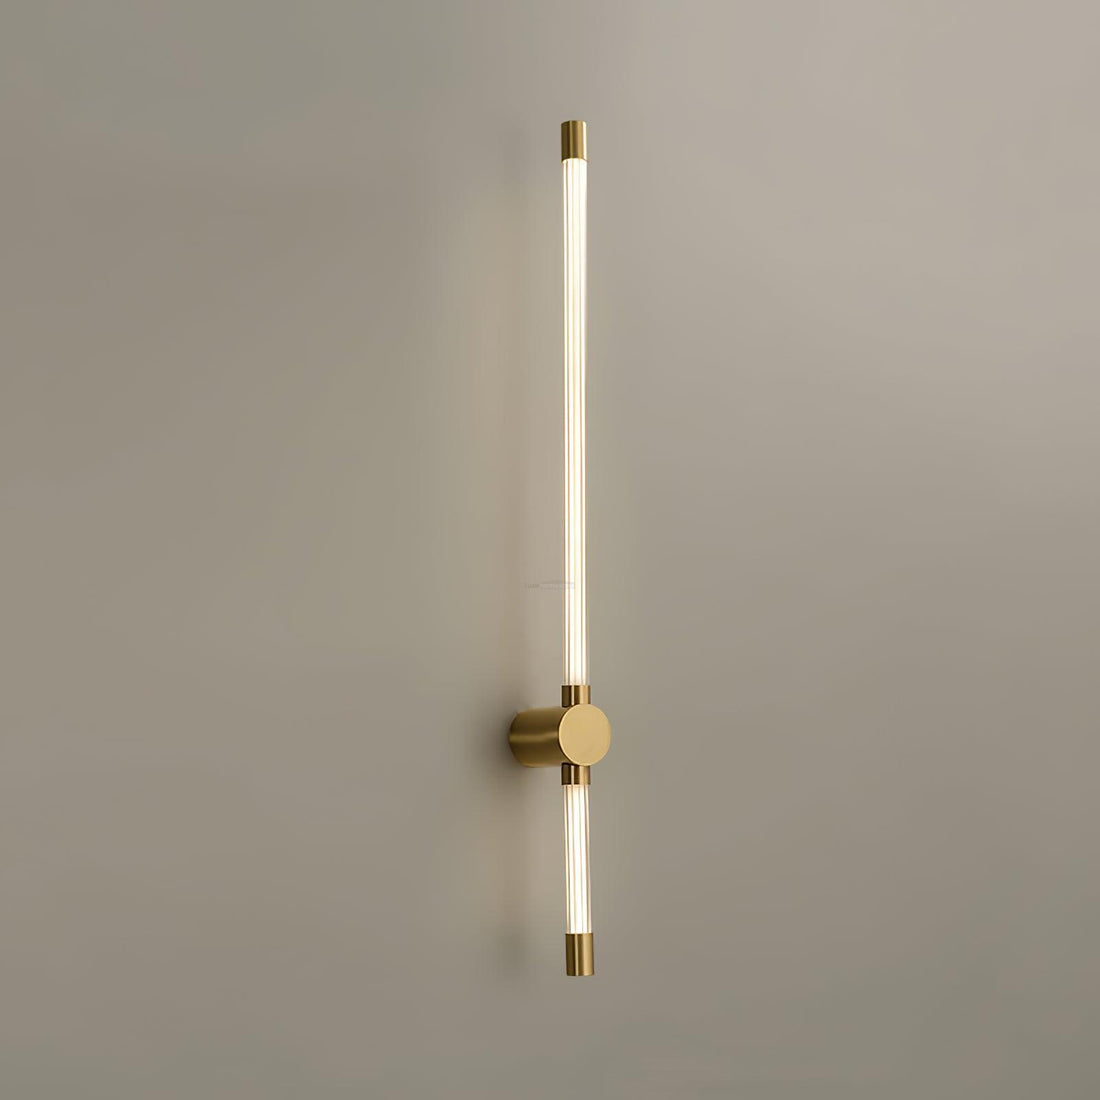 Linear LED Wall Sconce